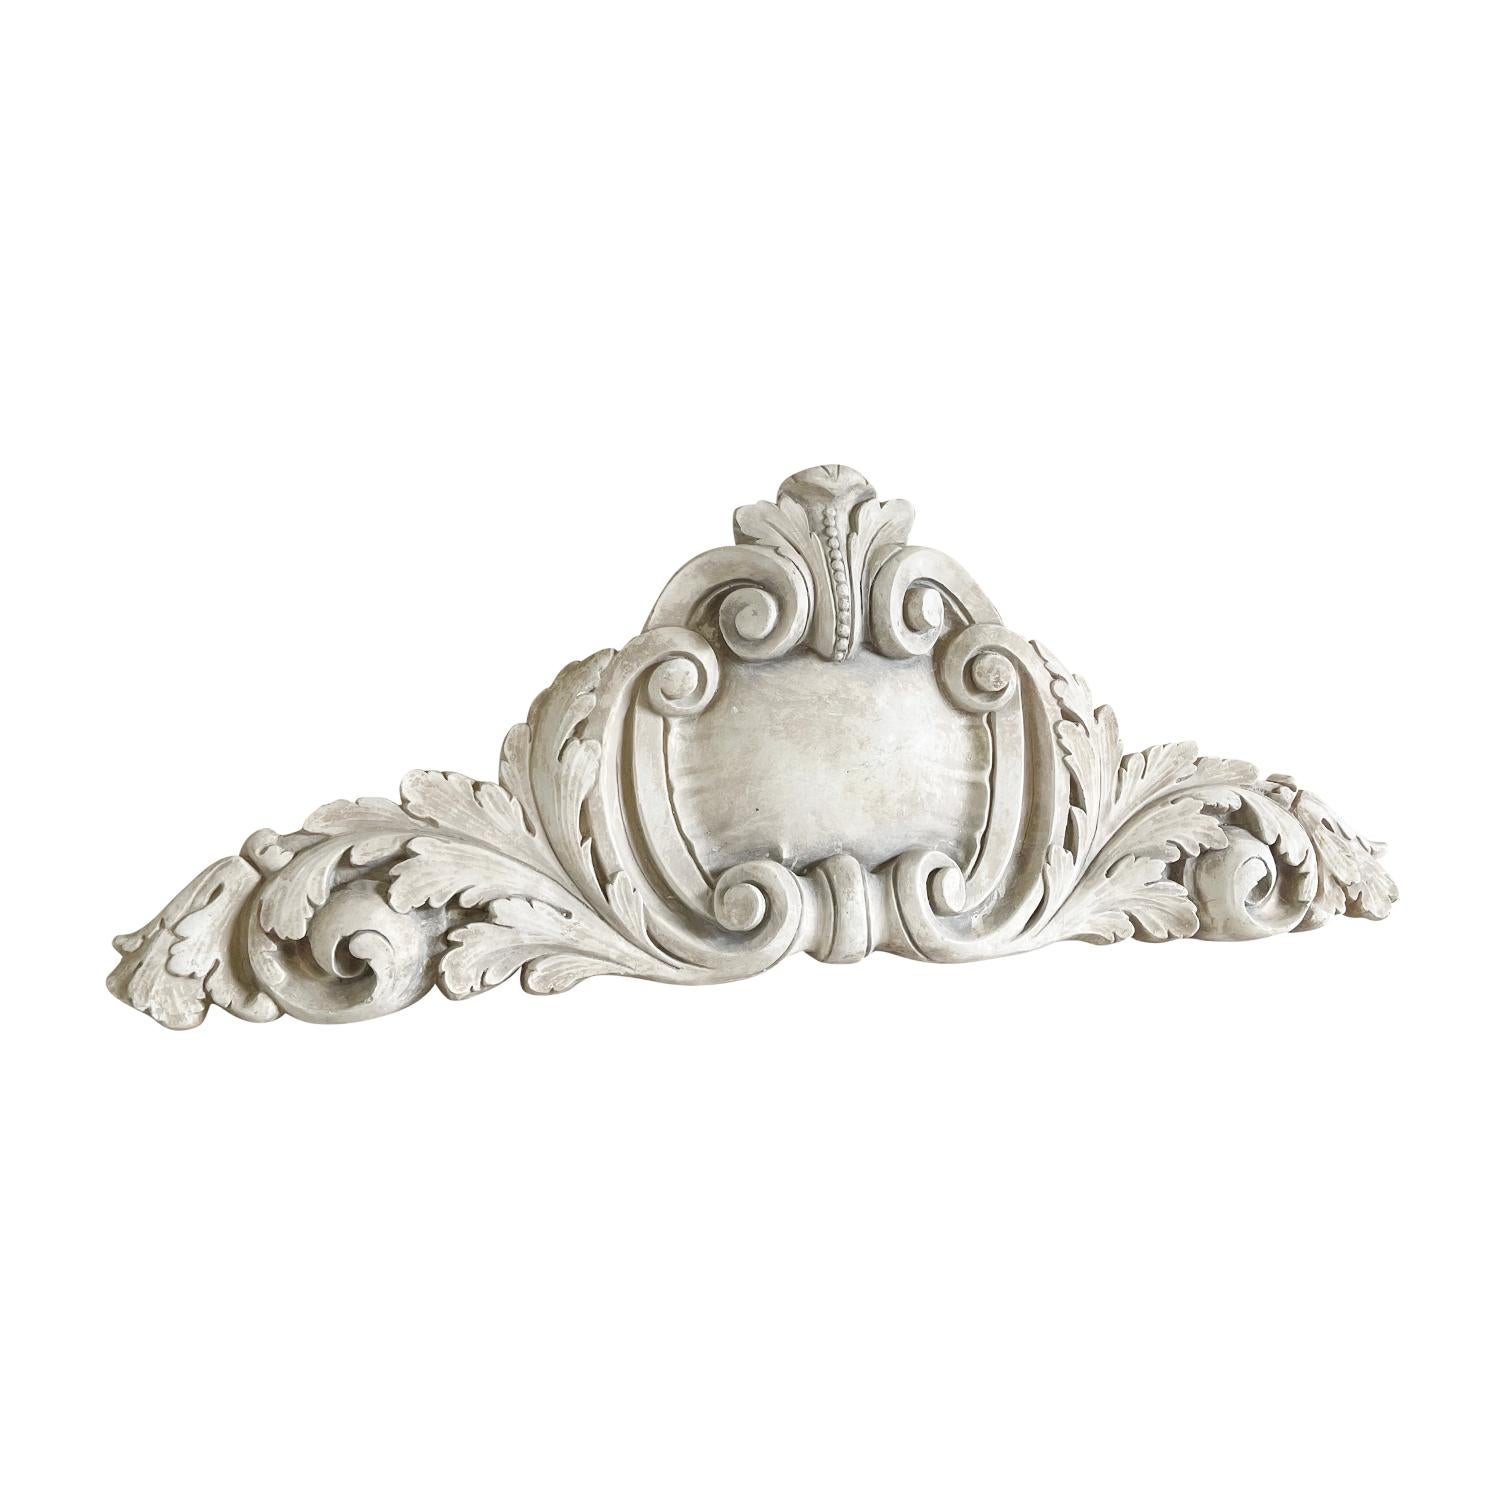 An oversized vintage sopra porte in the shape of an architectural element decorated with acanthus leaves and scrolls. The architectural model is molded in French Plaster. This material was often used for the interior of buildings. The decoration was